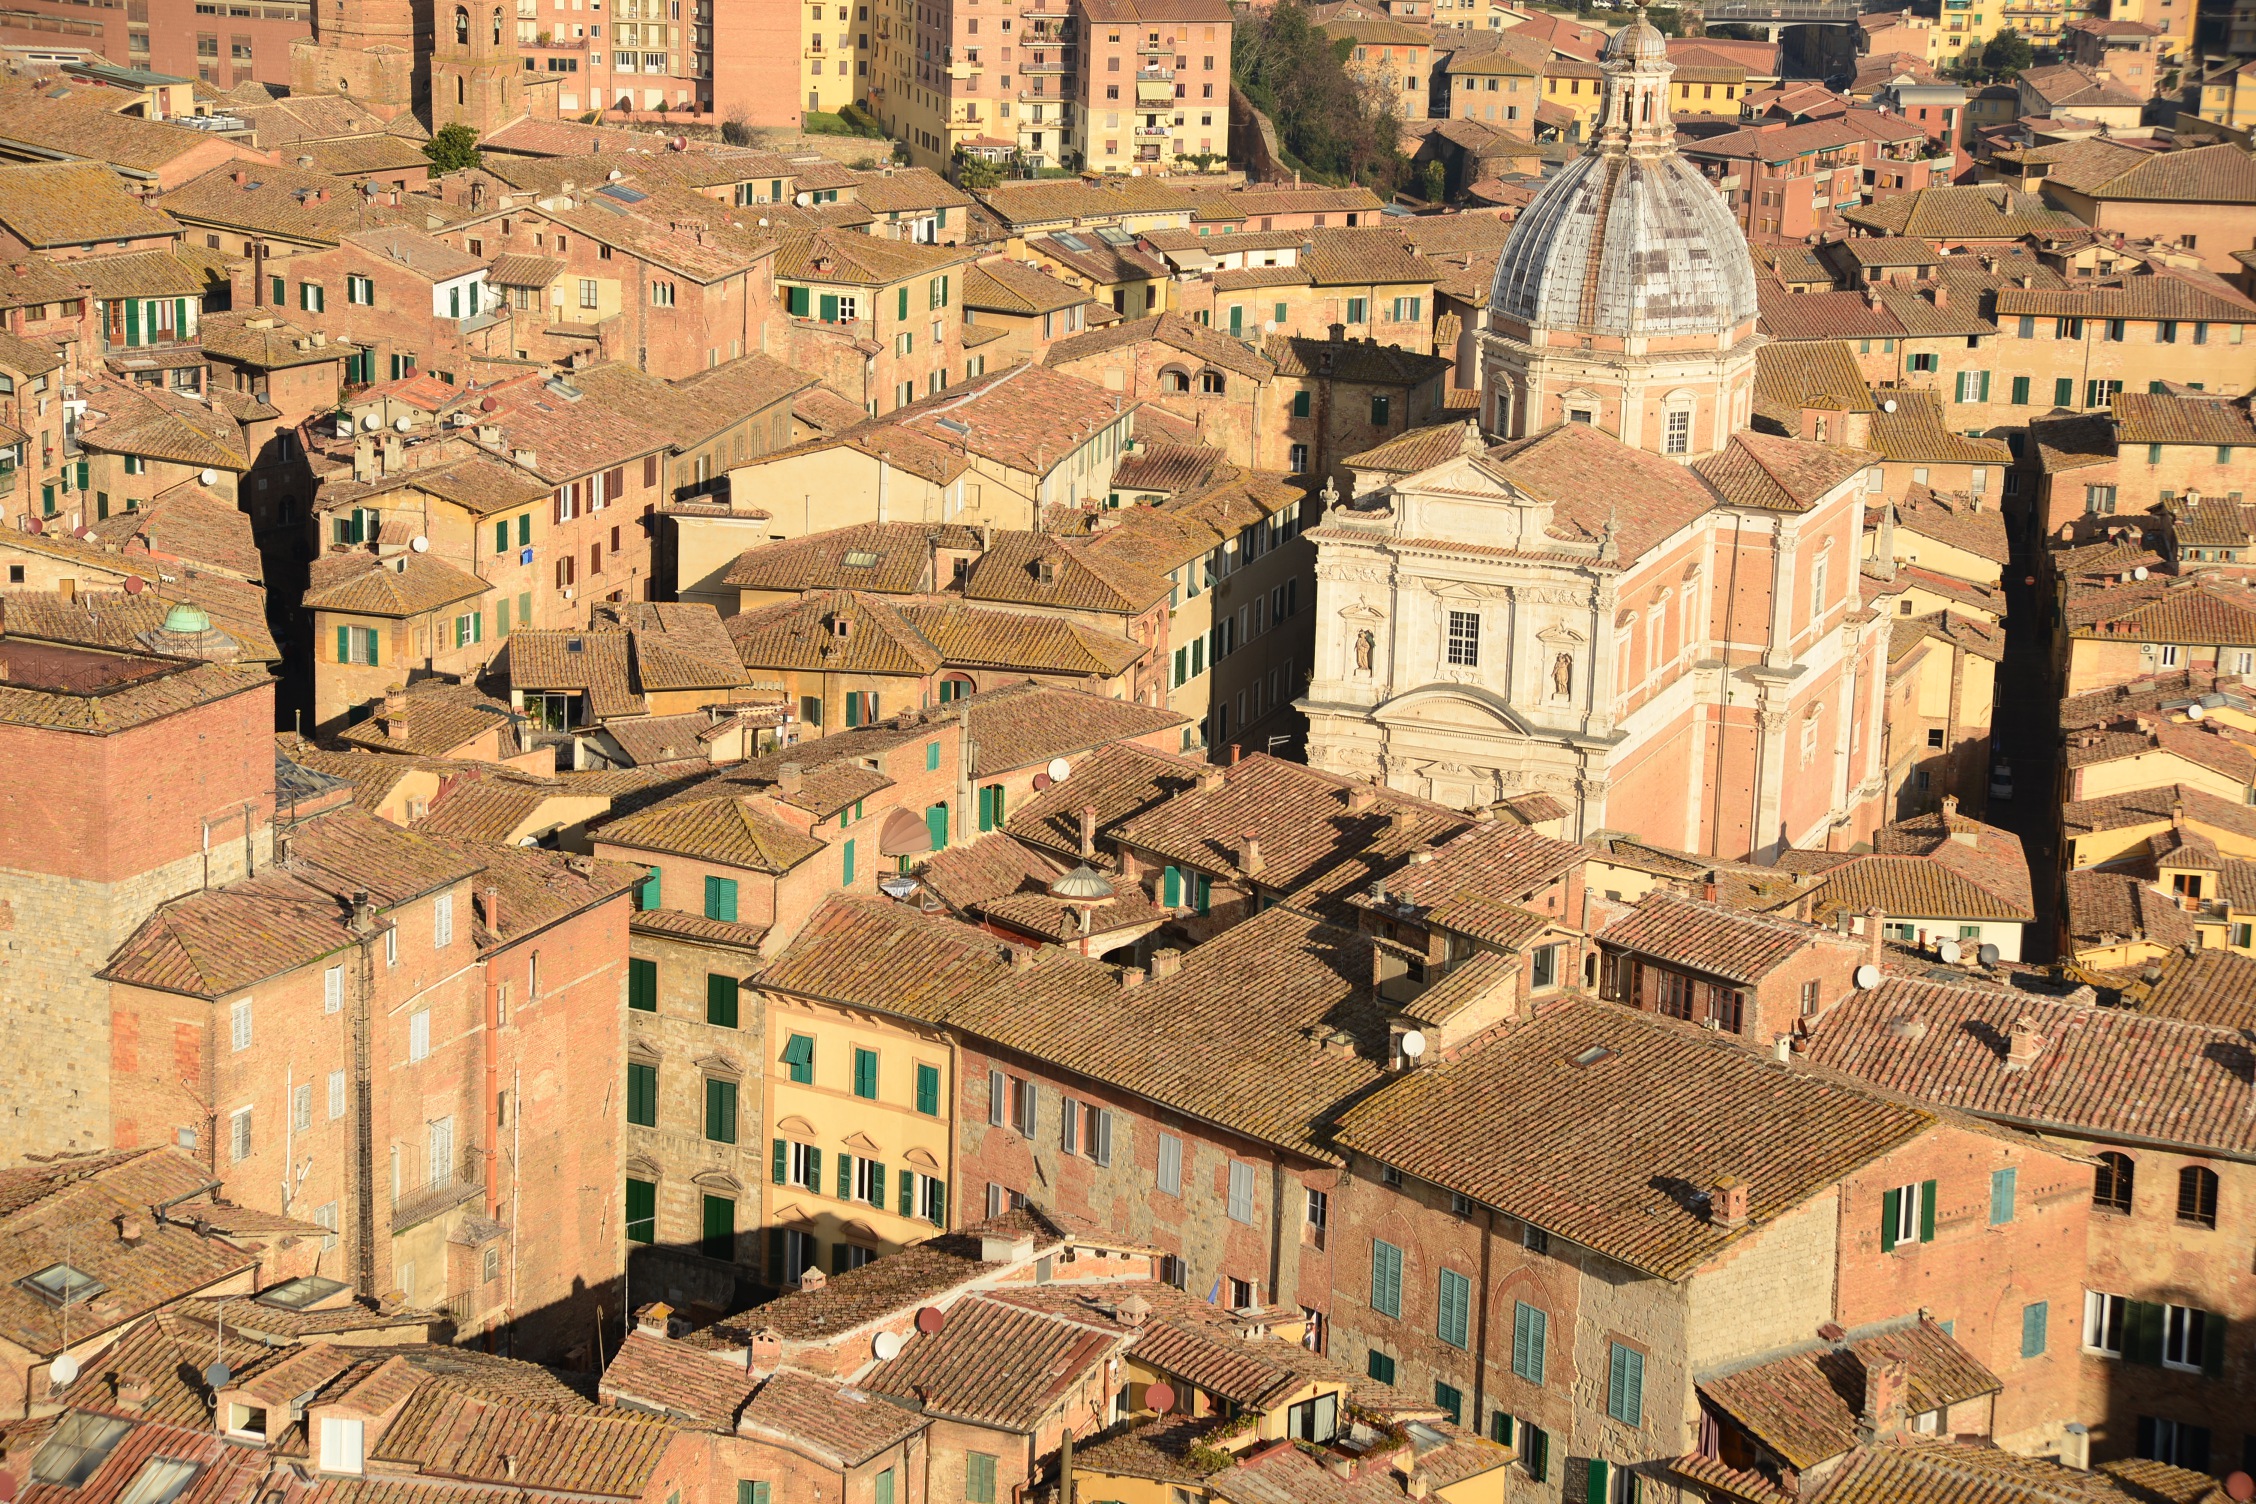 The town of Siena